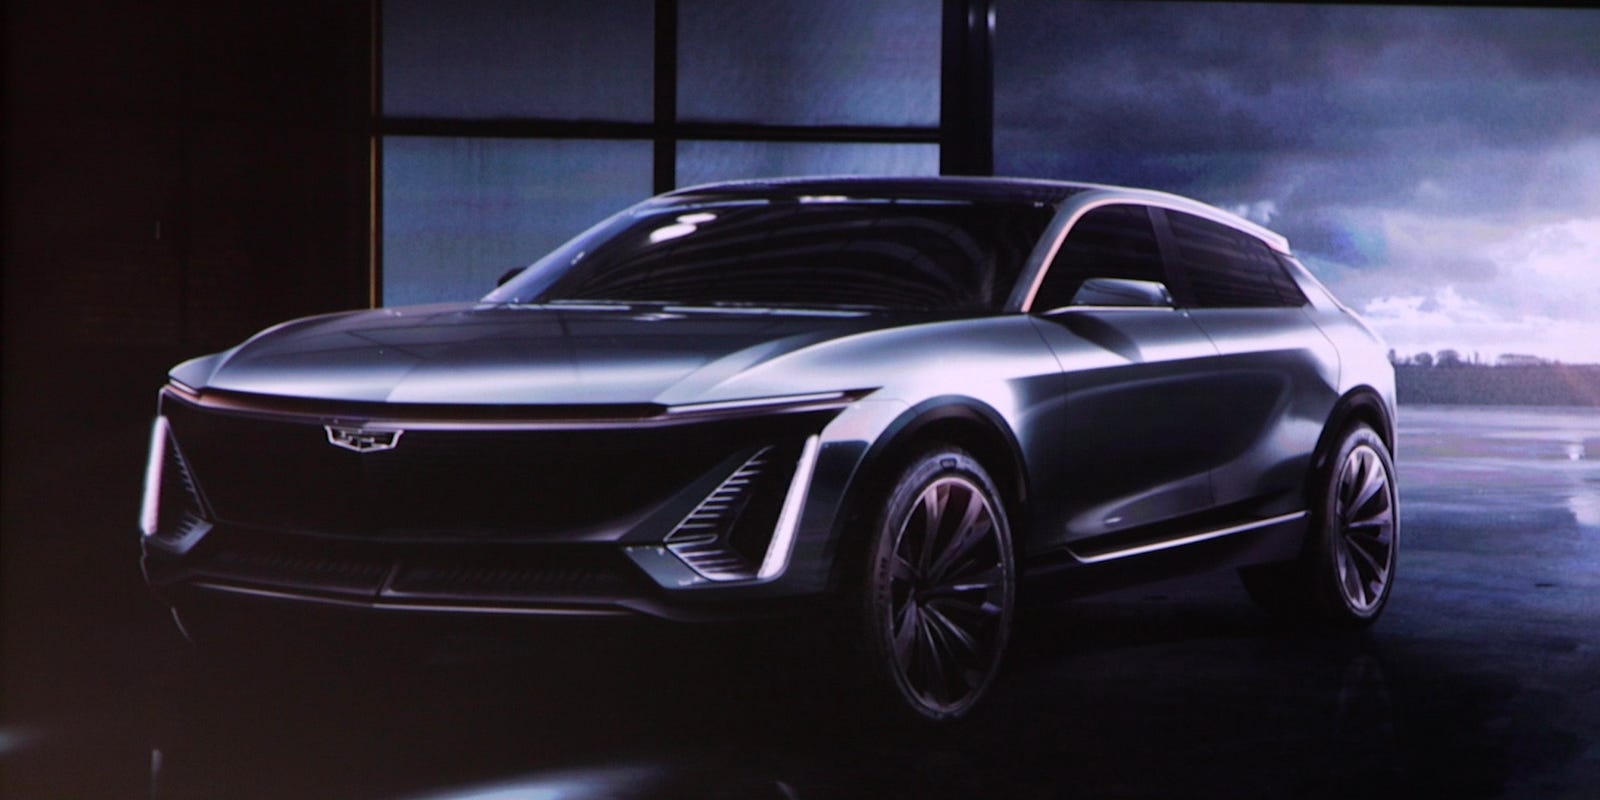 GM offers up revealing new details of future Cadillac electric cars